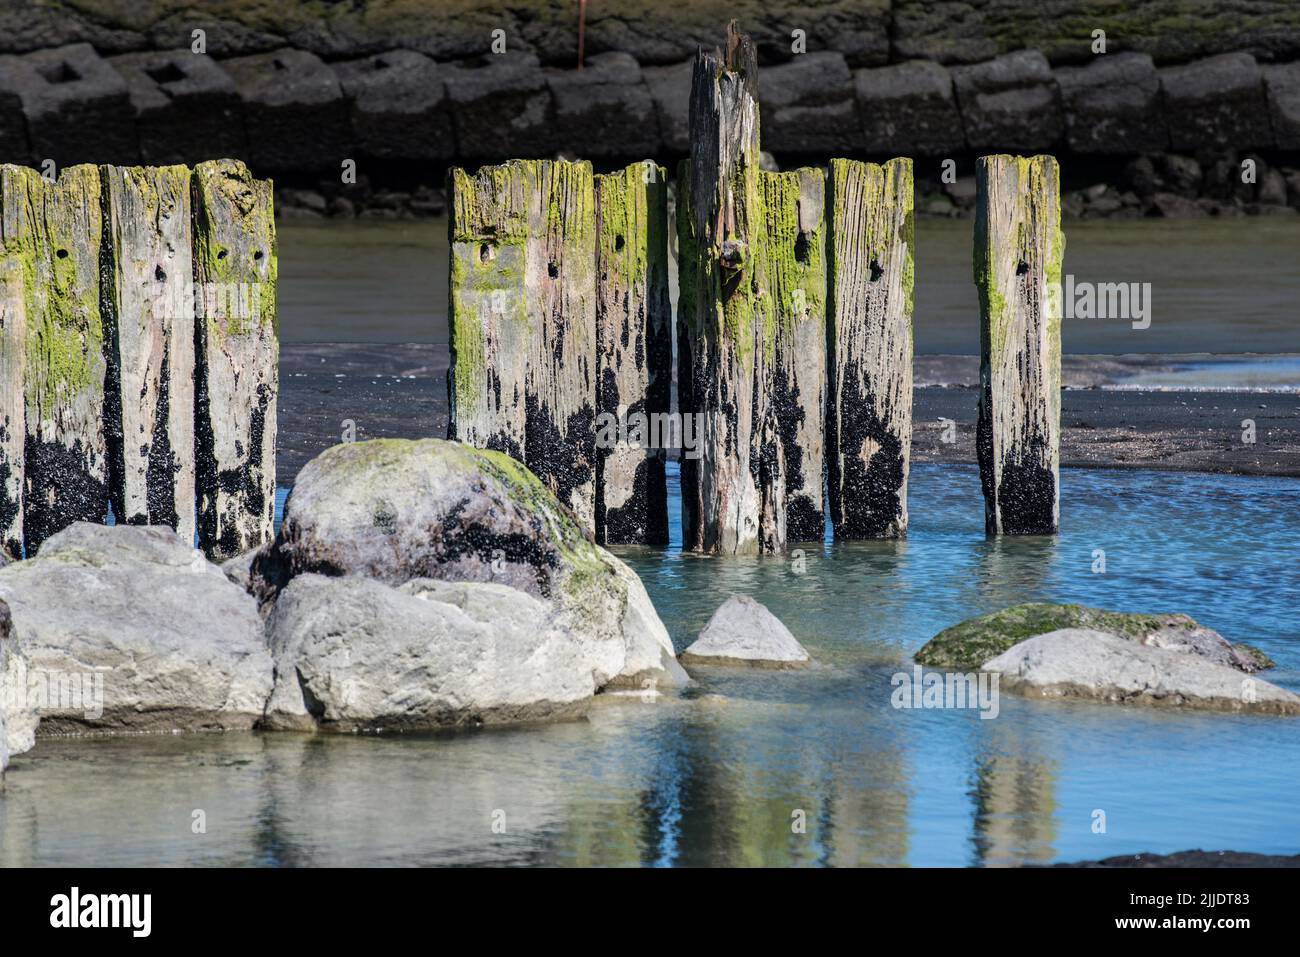 Old wooden groynes on a beach in Palliser Bay located at the southern end of the North Island of New Zealand, to the southeast of Wellington. Stock Photo